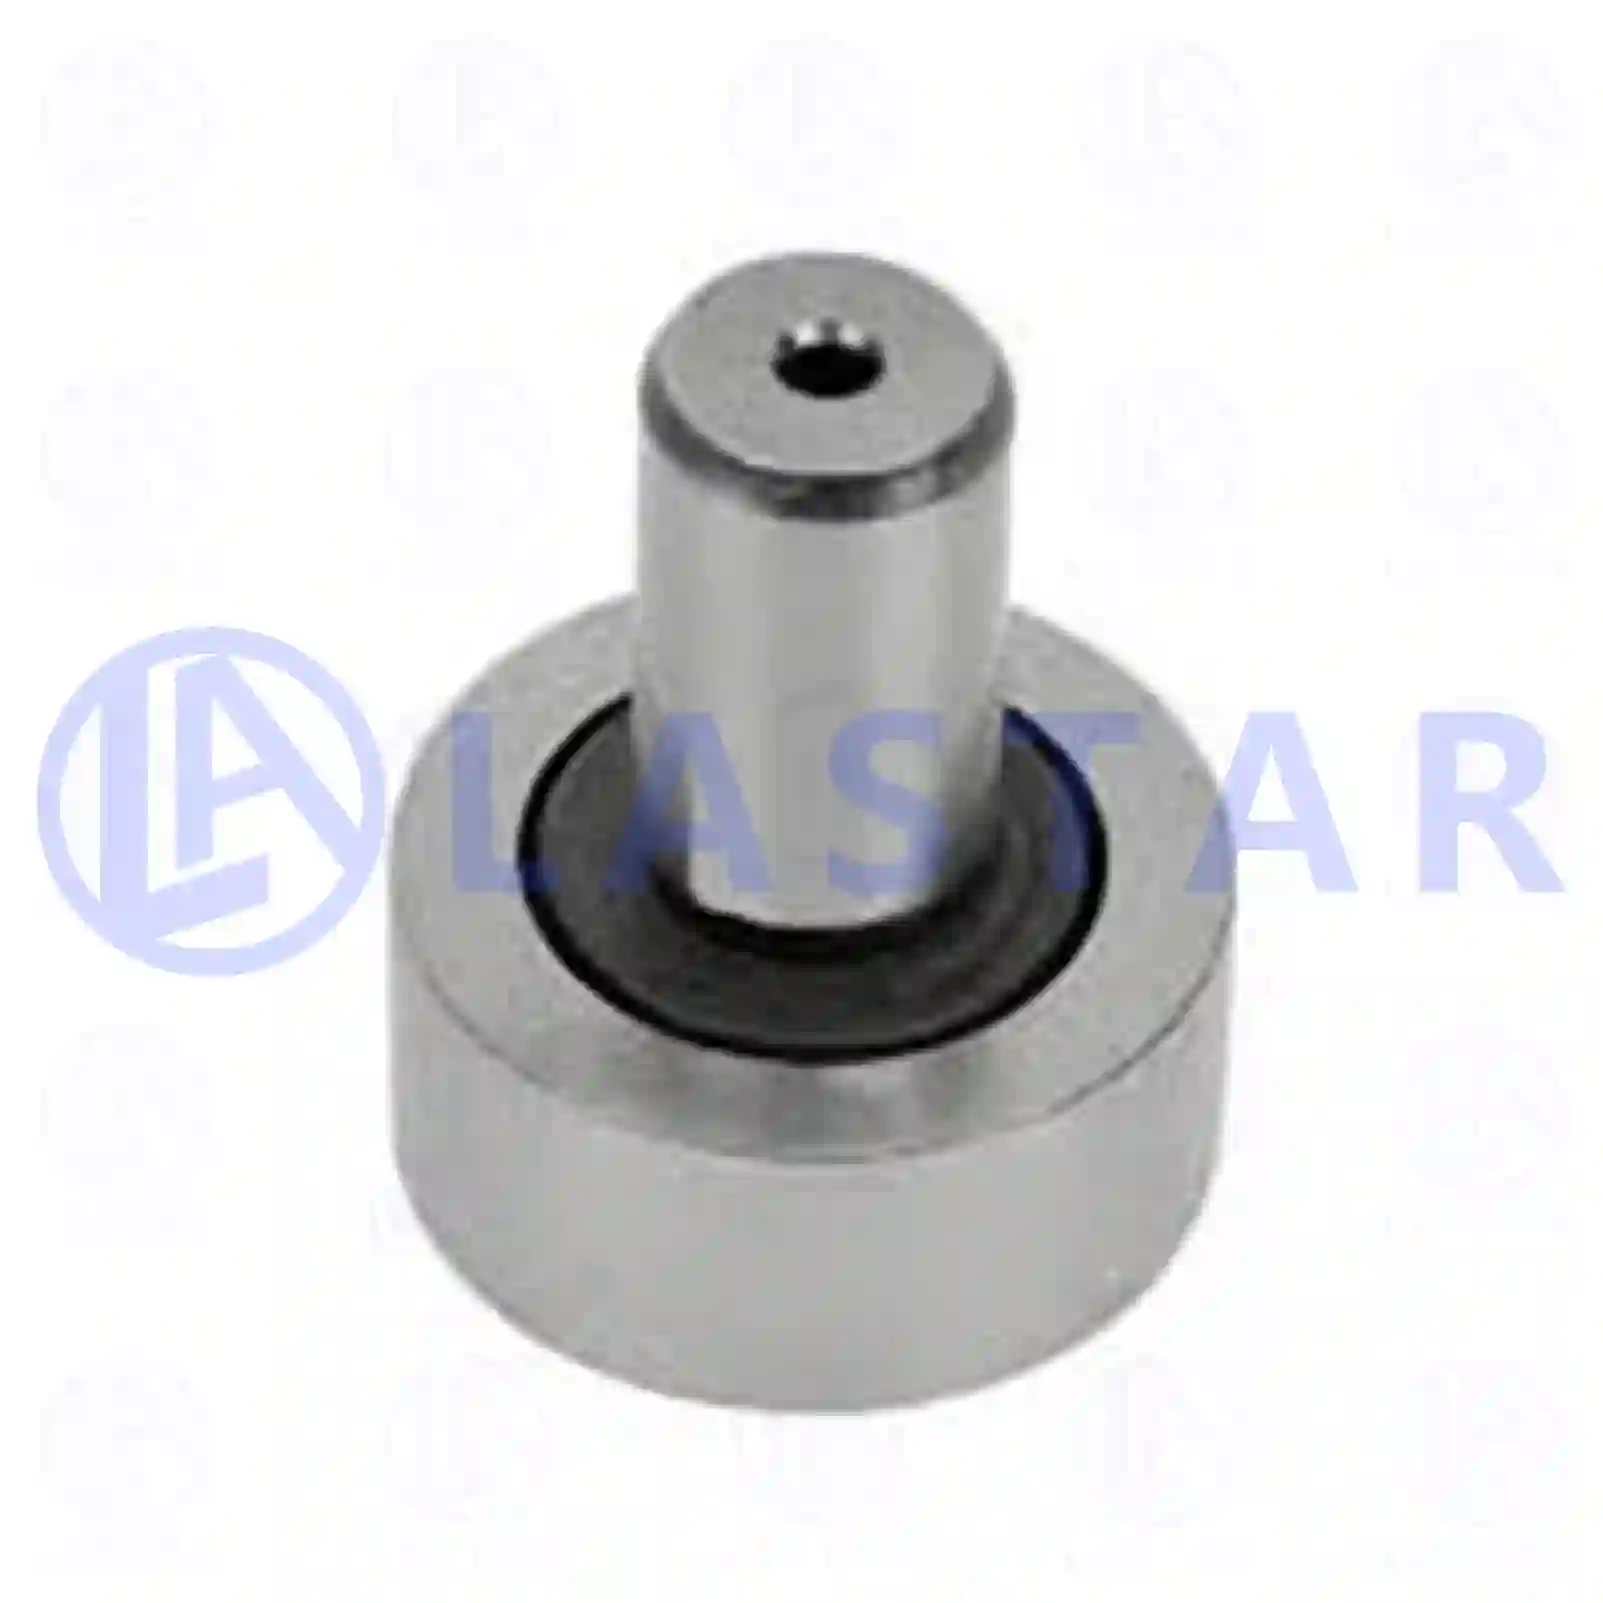  Roller, release fork || Lastar Spare Part | Truck Spare Parts, Auotomotive Spare Parts